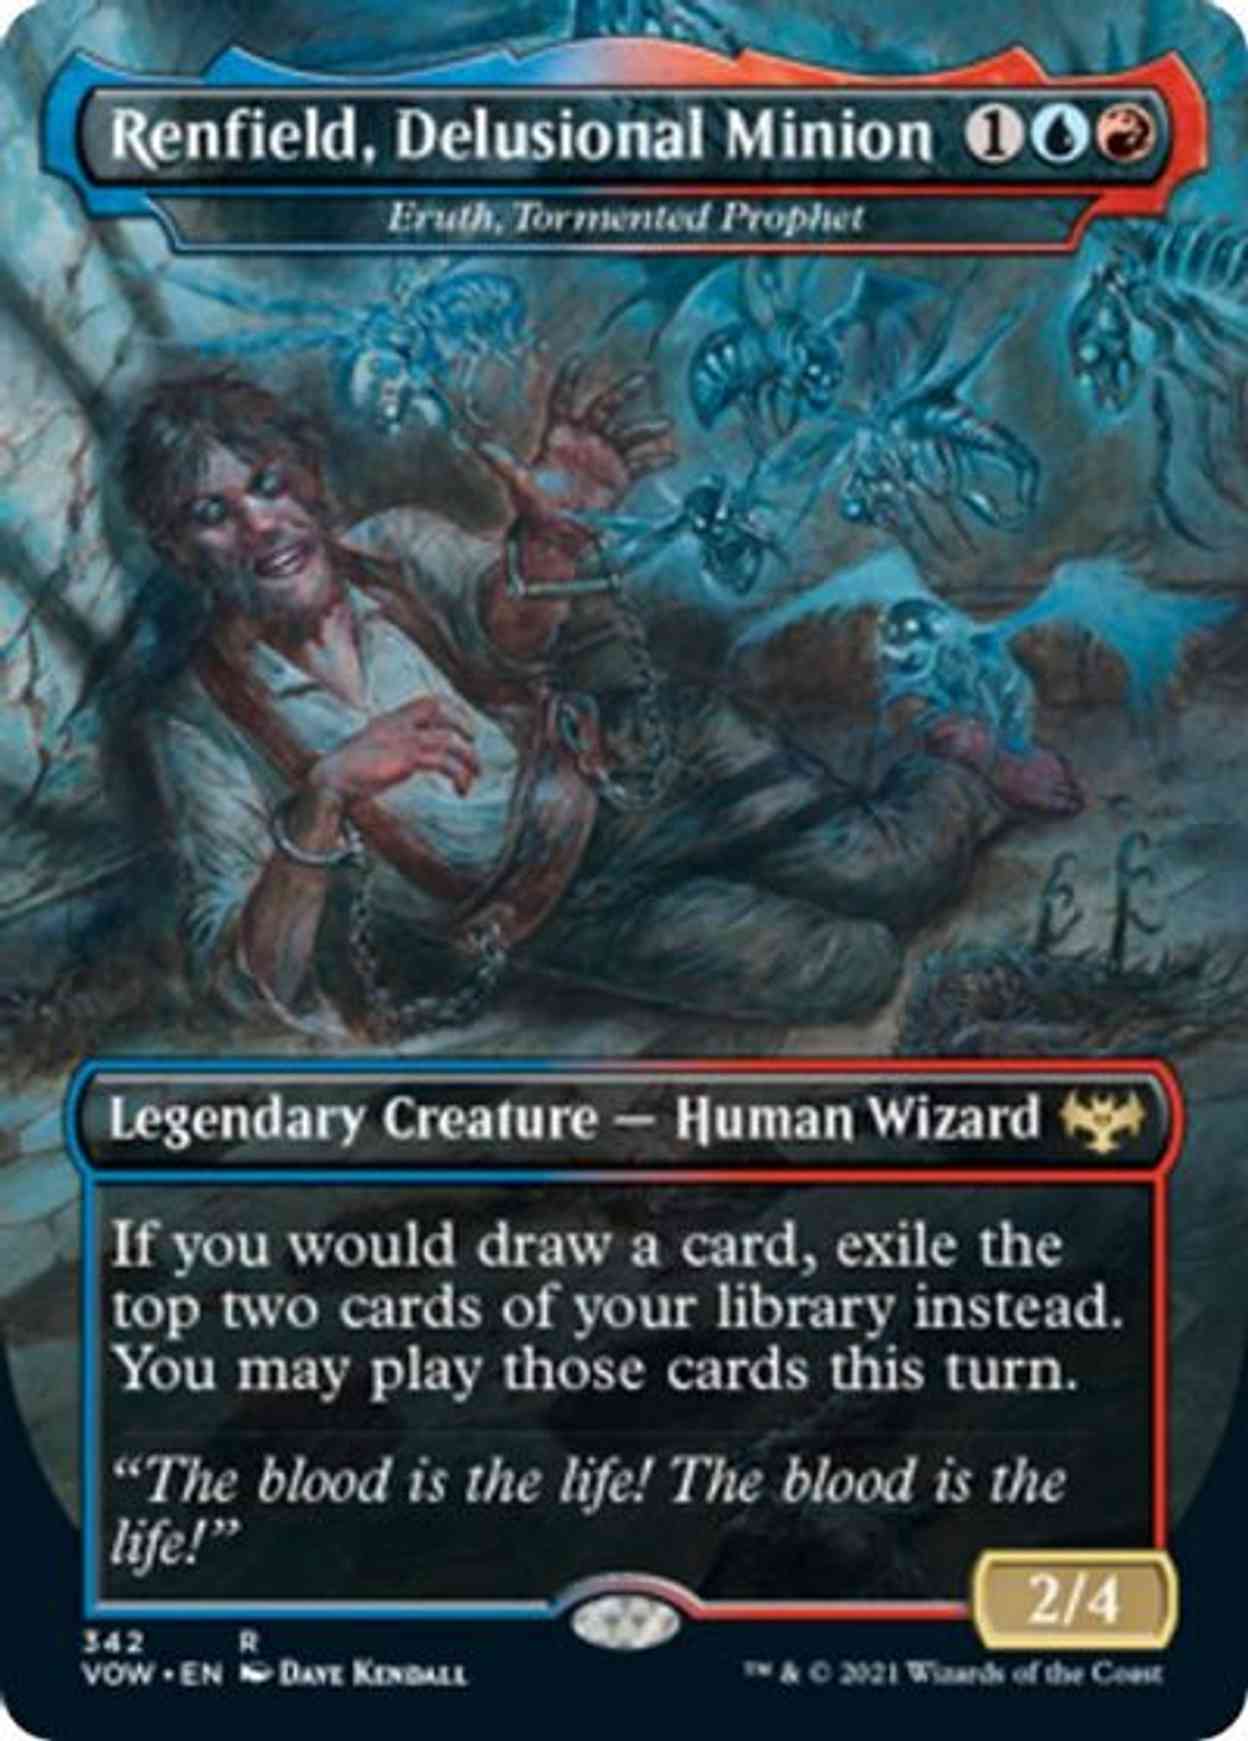 Renfield, Delusional Minion - Eruth, Tormented Prophet magic card front